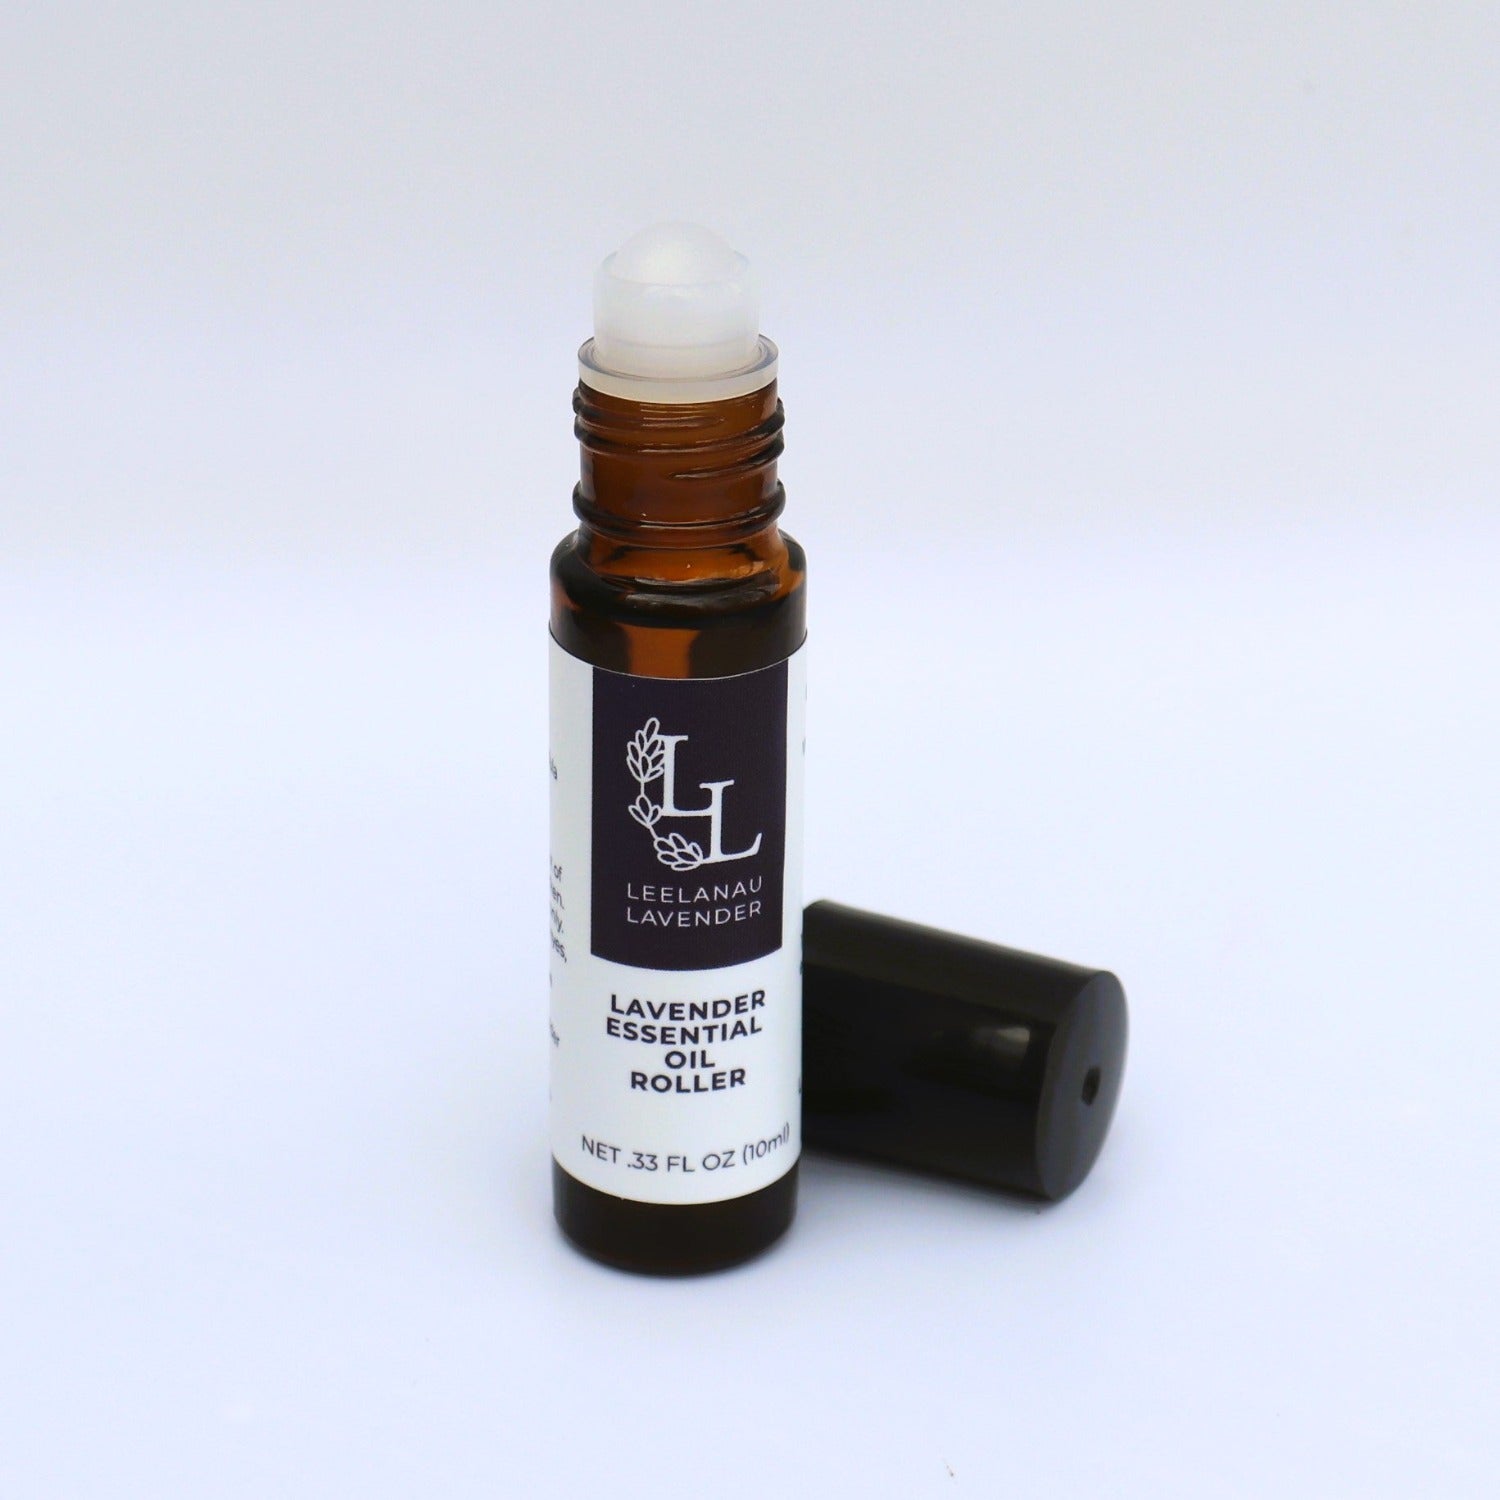 A small roll-on bottle of lavender essential oil